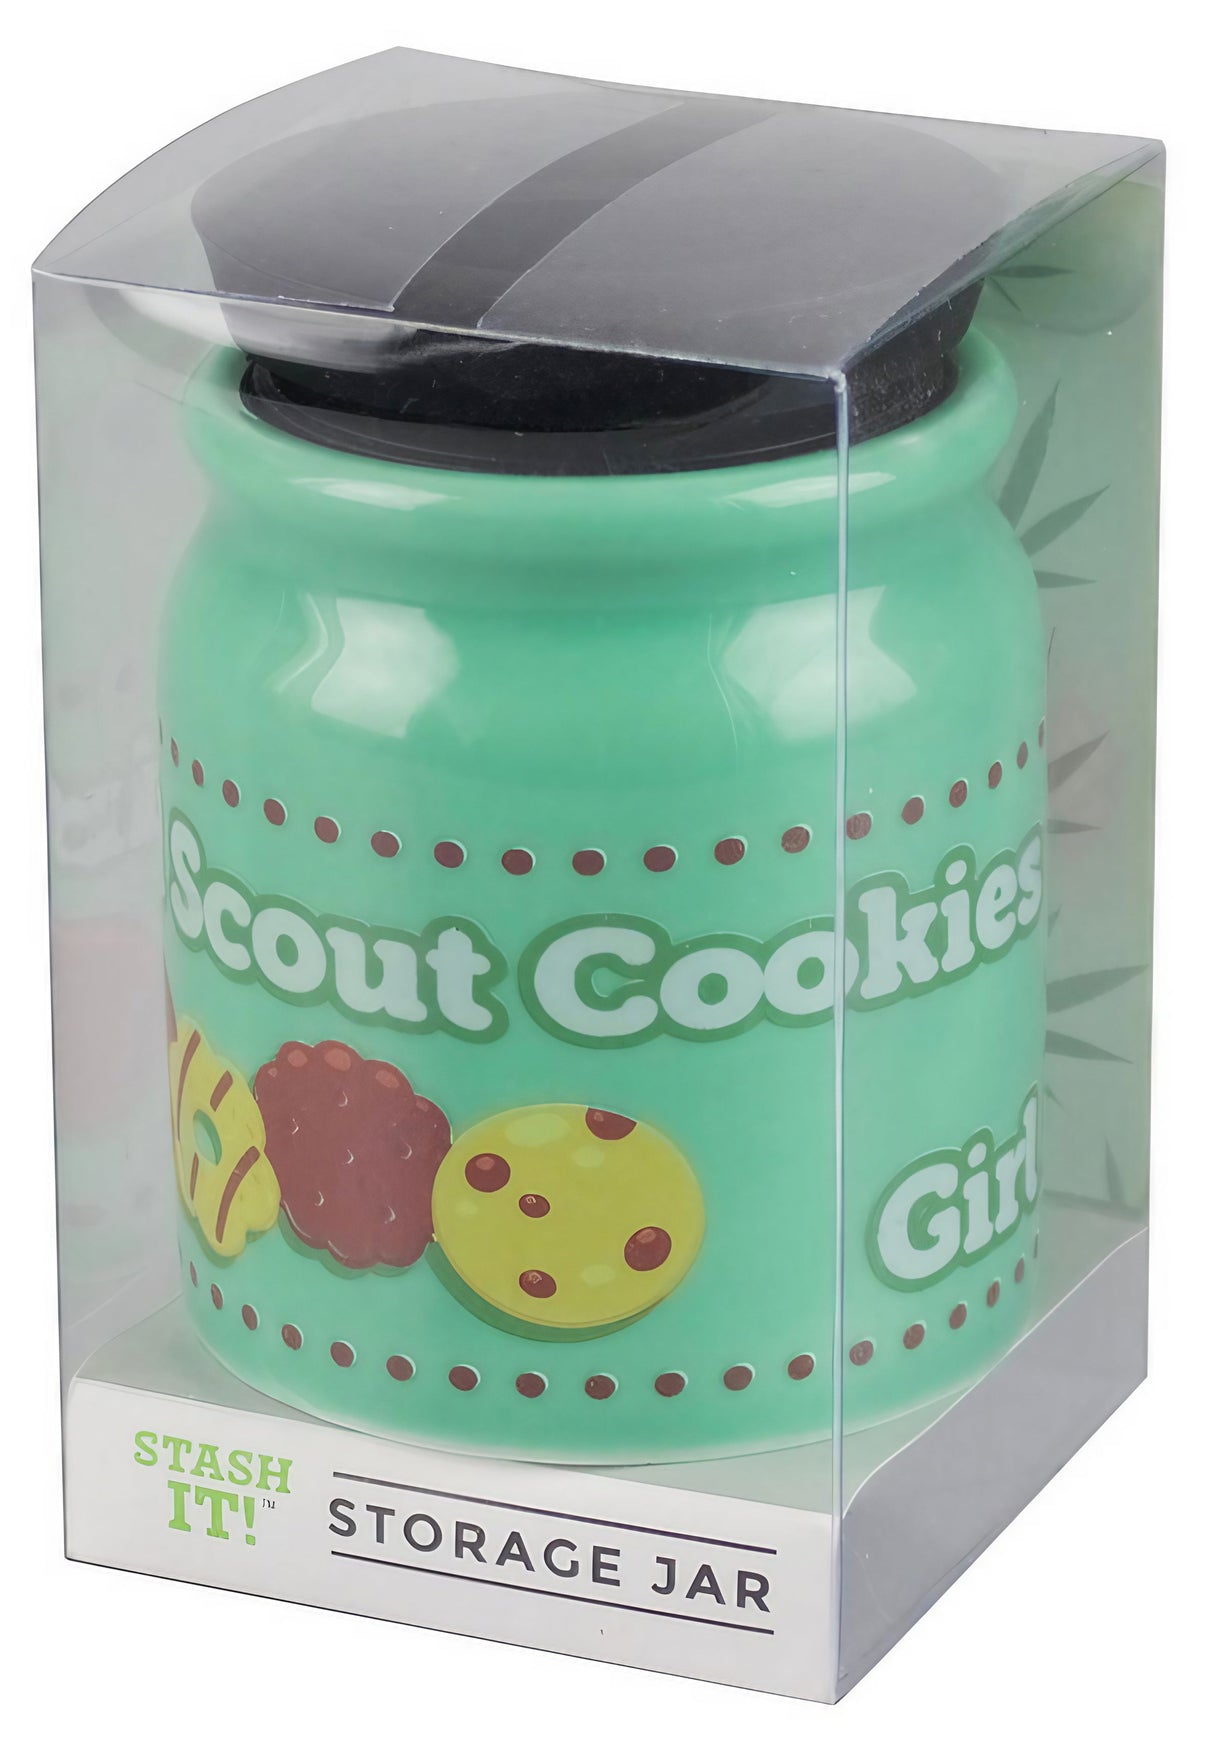 Ceramic Stash Jar with Scout Cookies design, rubber seal lid, front view in packaging